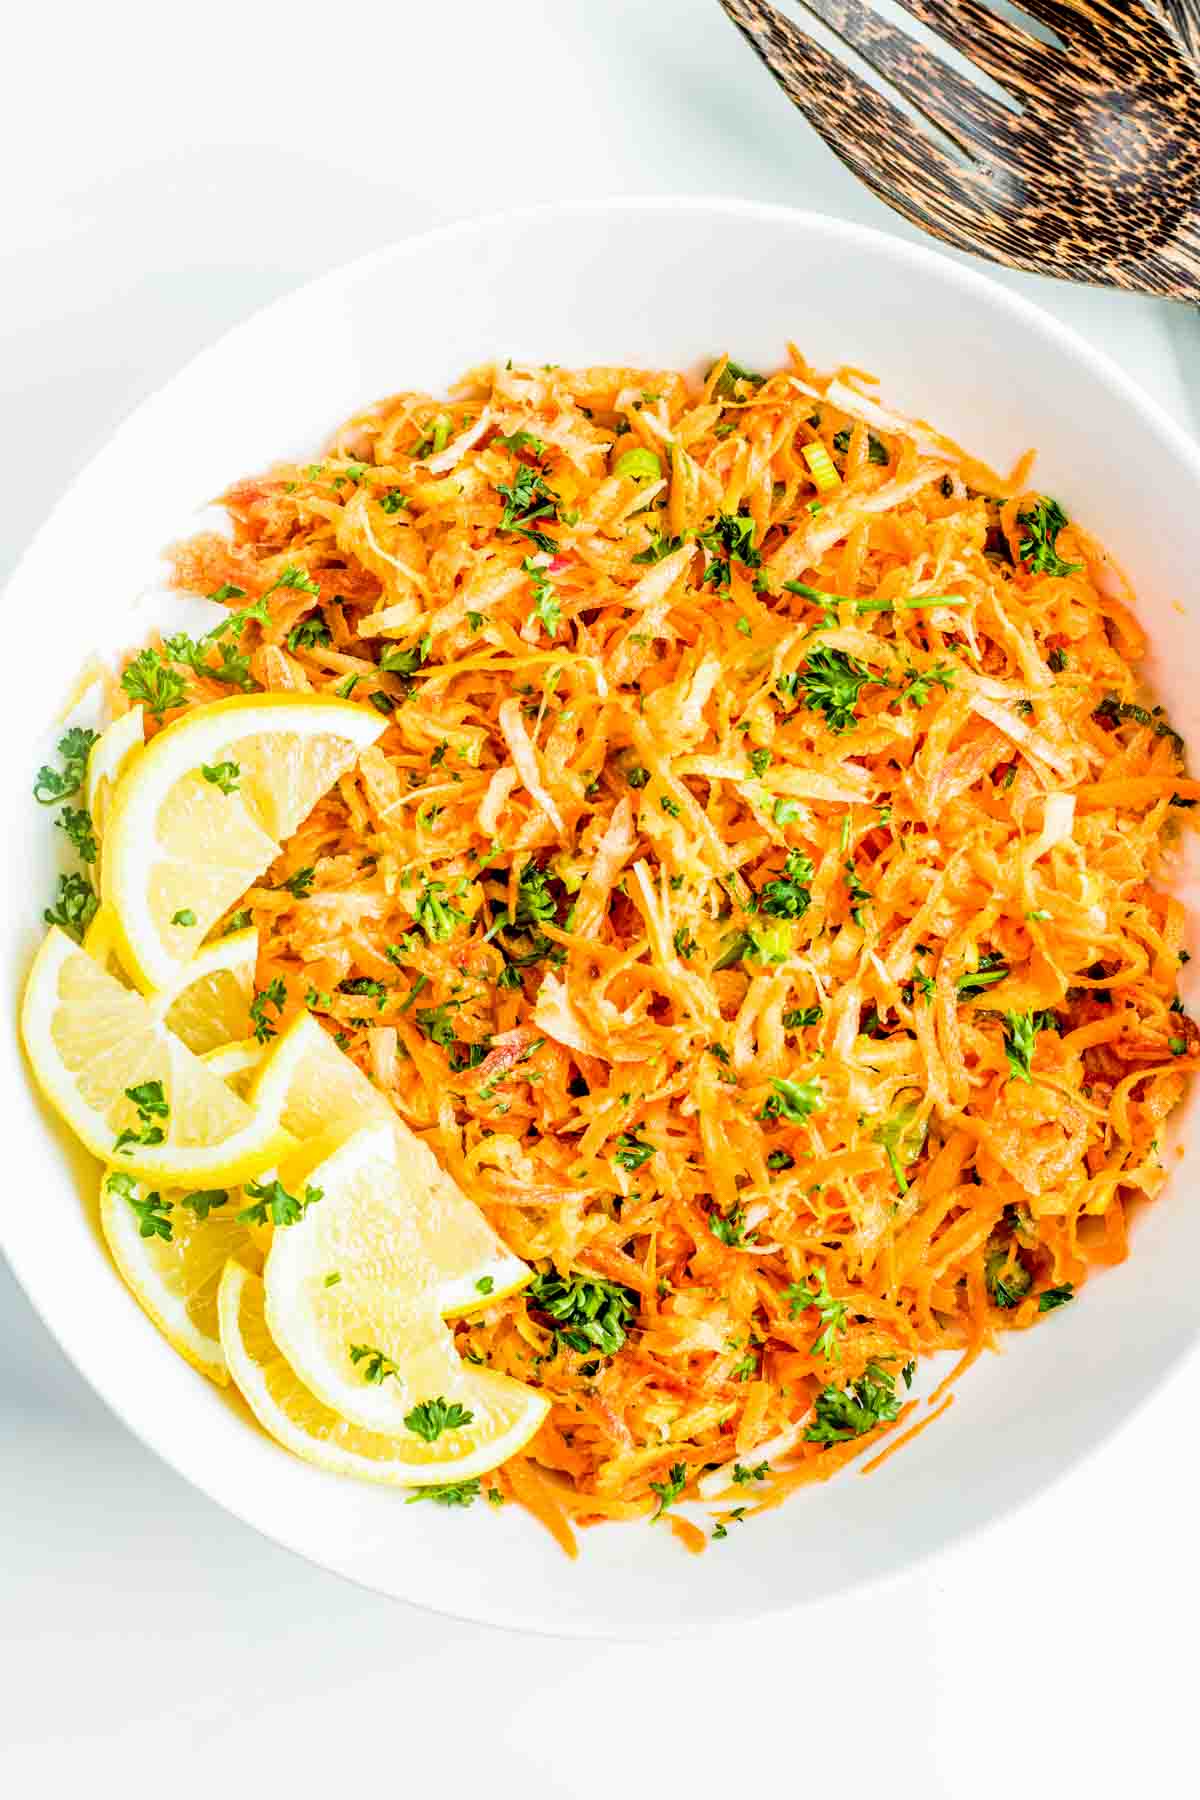 A plate of zesty lemon carrot salad garnished with chopped parsley.